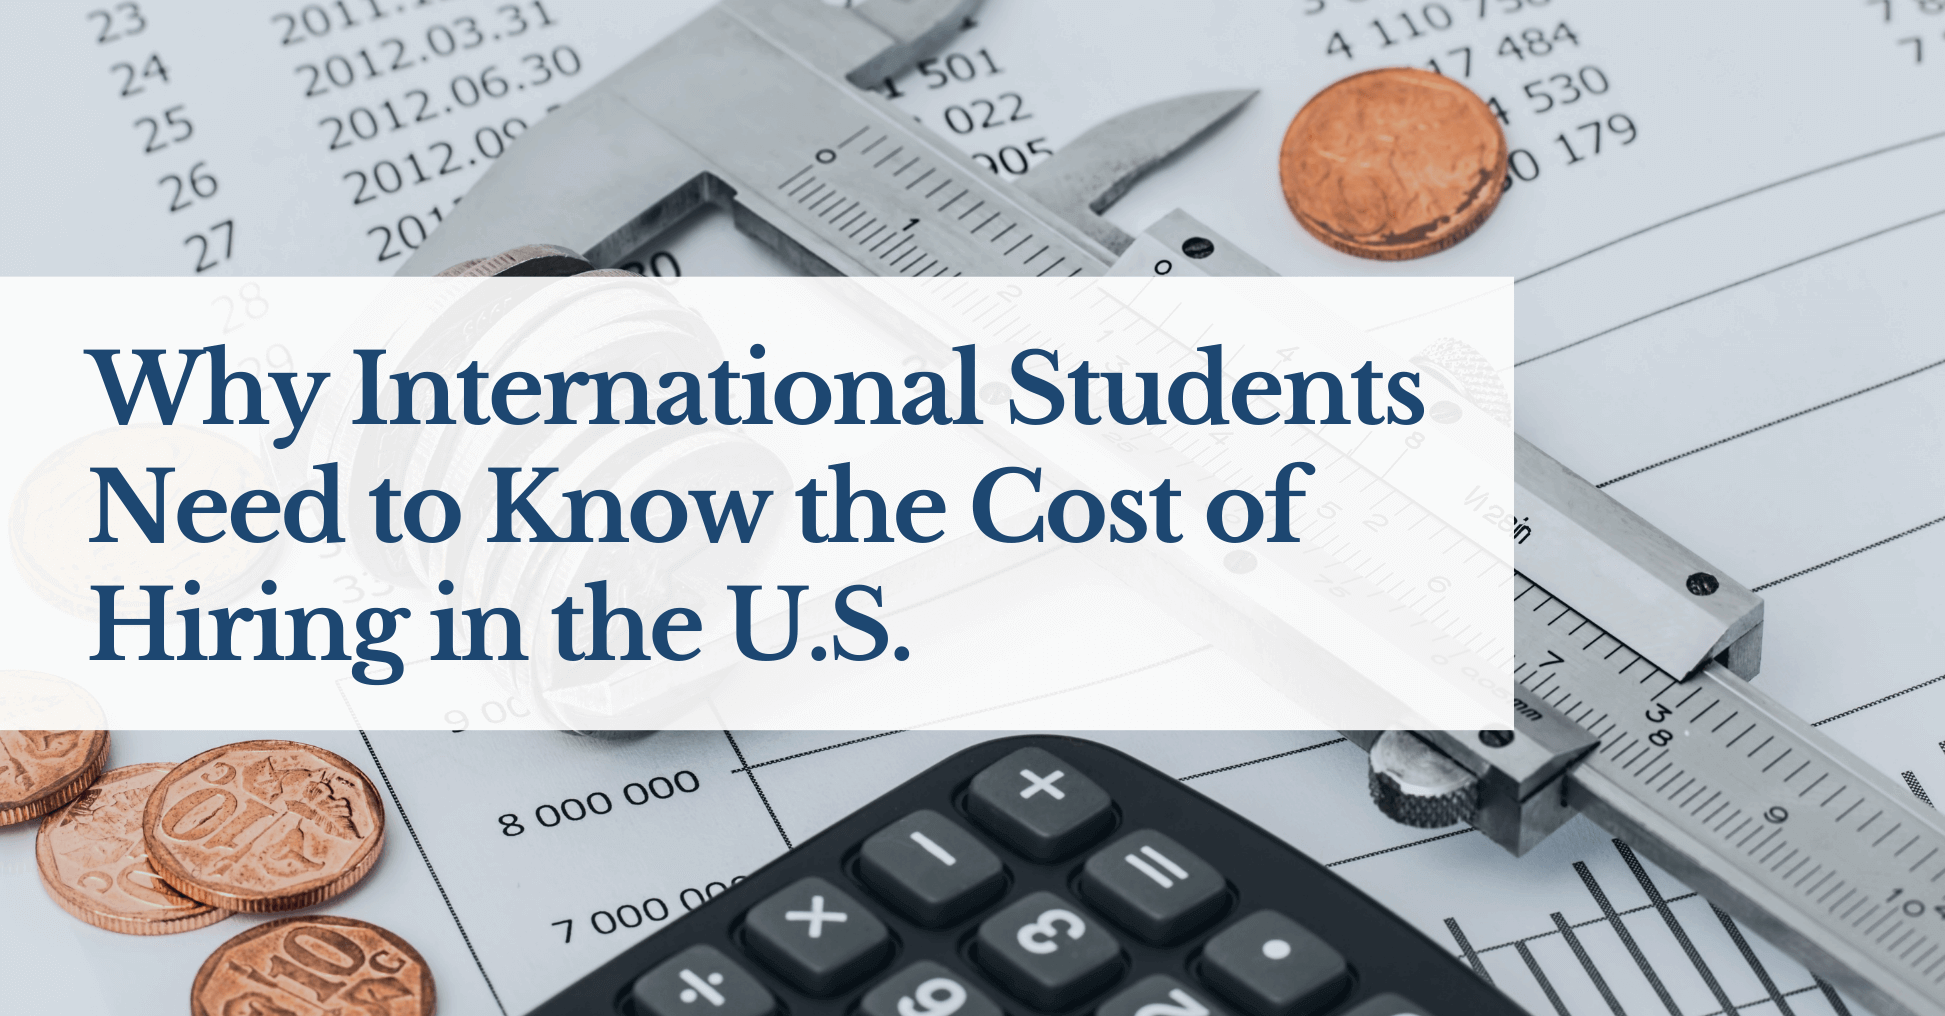 Why International Students Need to Know the Cost of Hiring in the U.S.